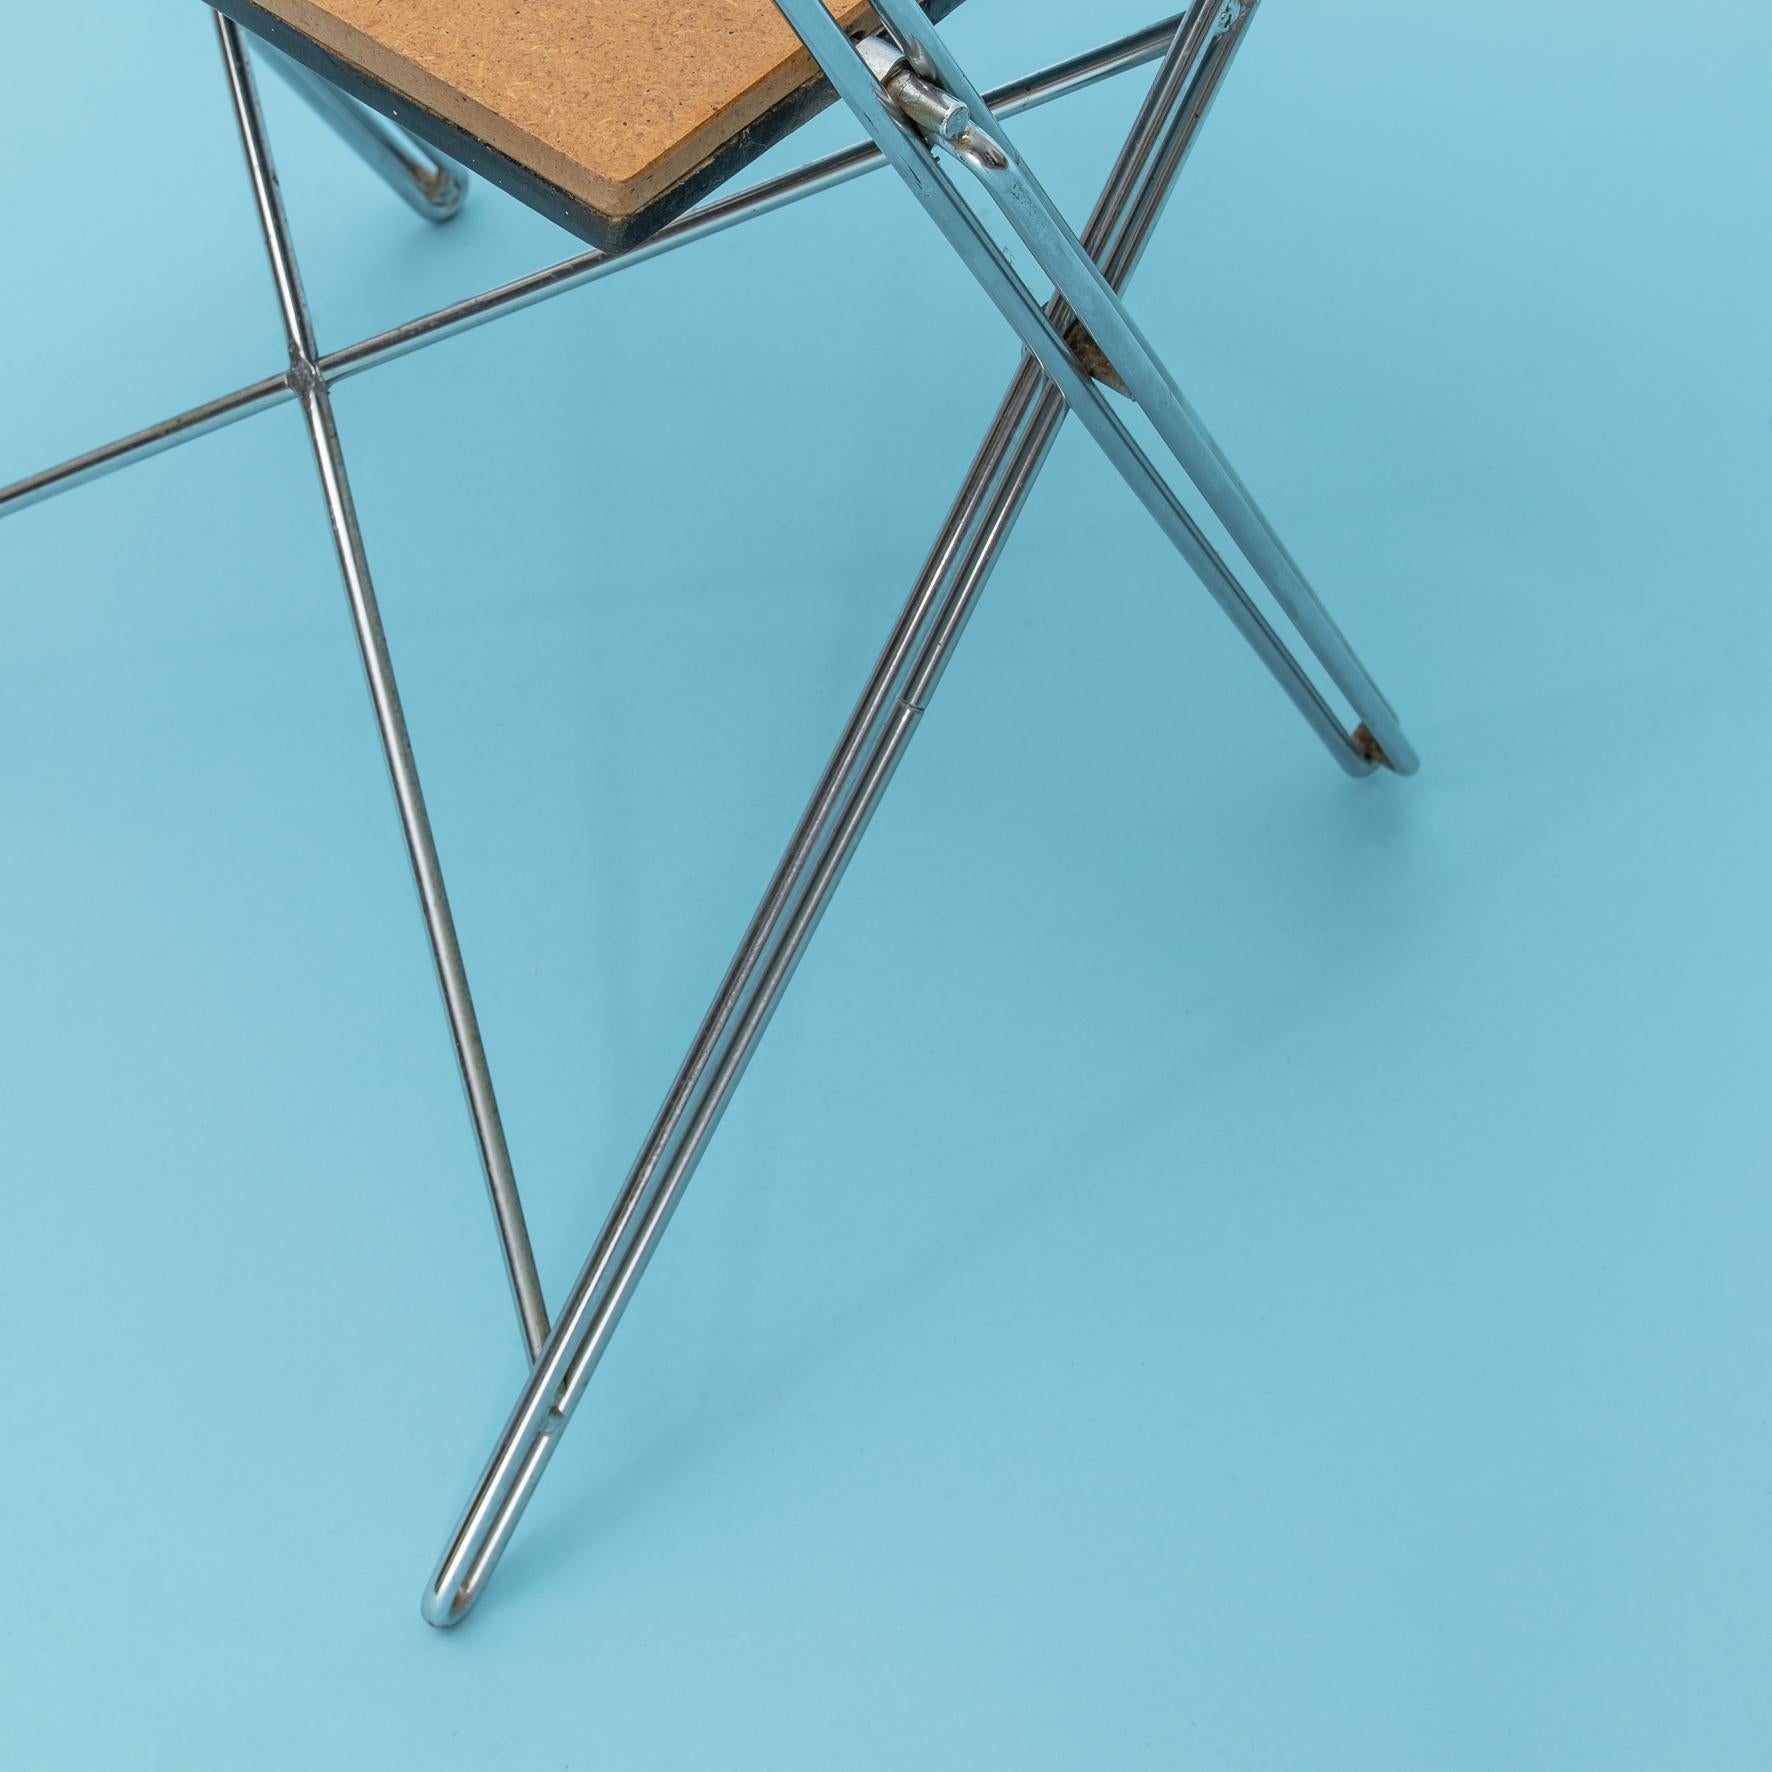 Metal Rene-Jean Caillette, RJC folding and reversible chair VIA ed., 1986 For Sale